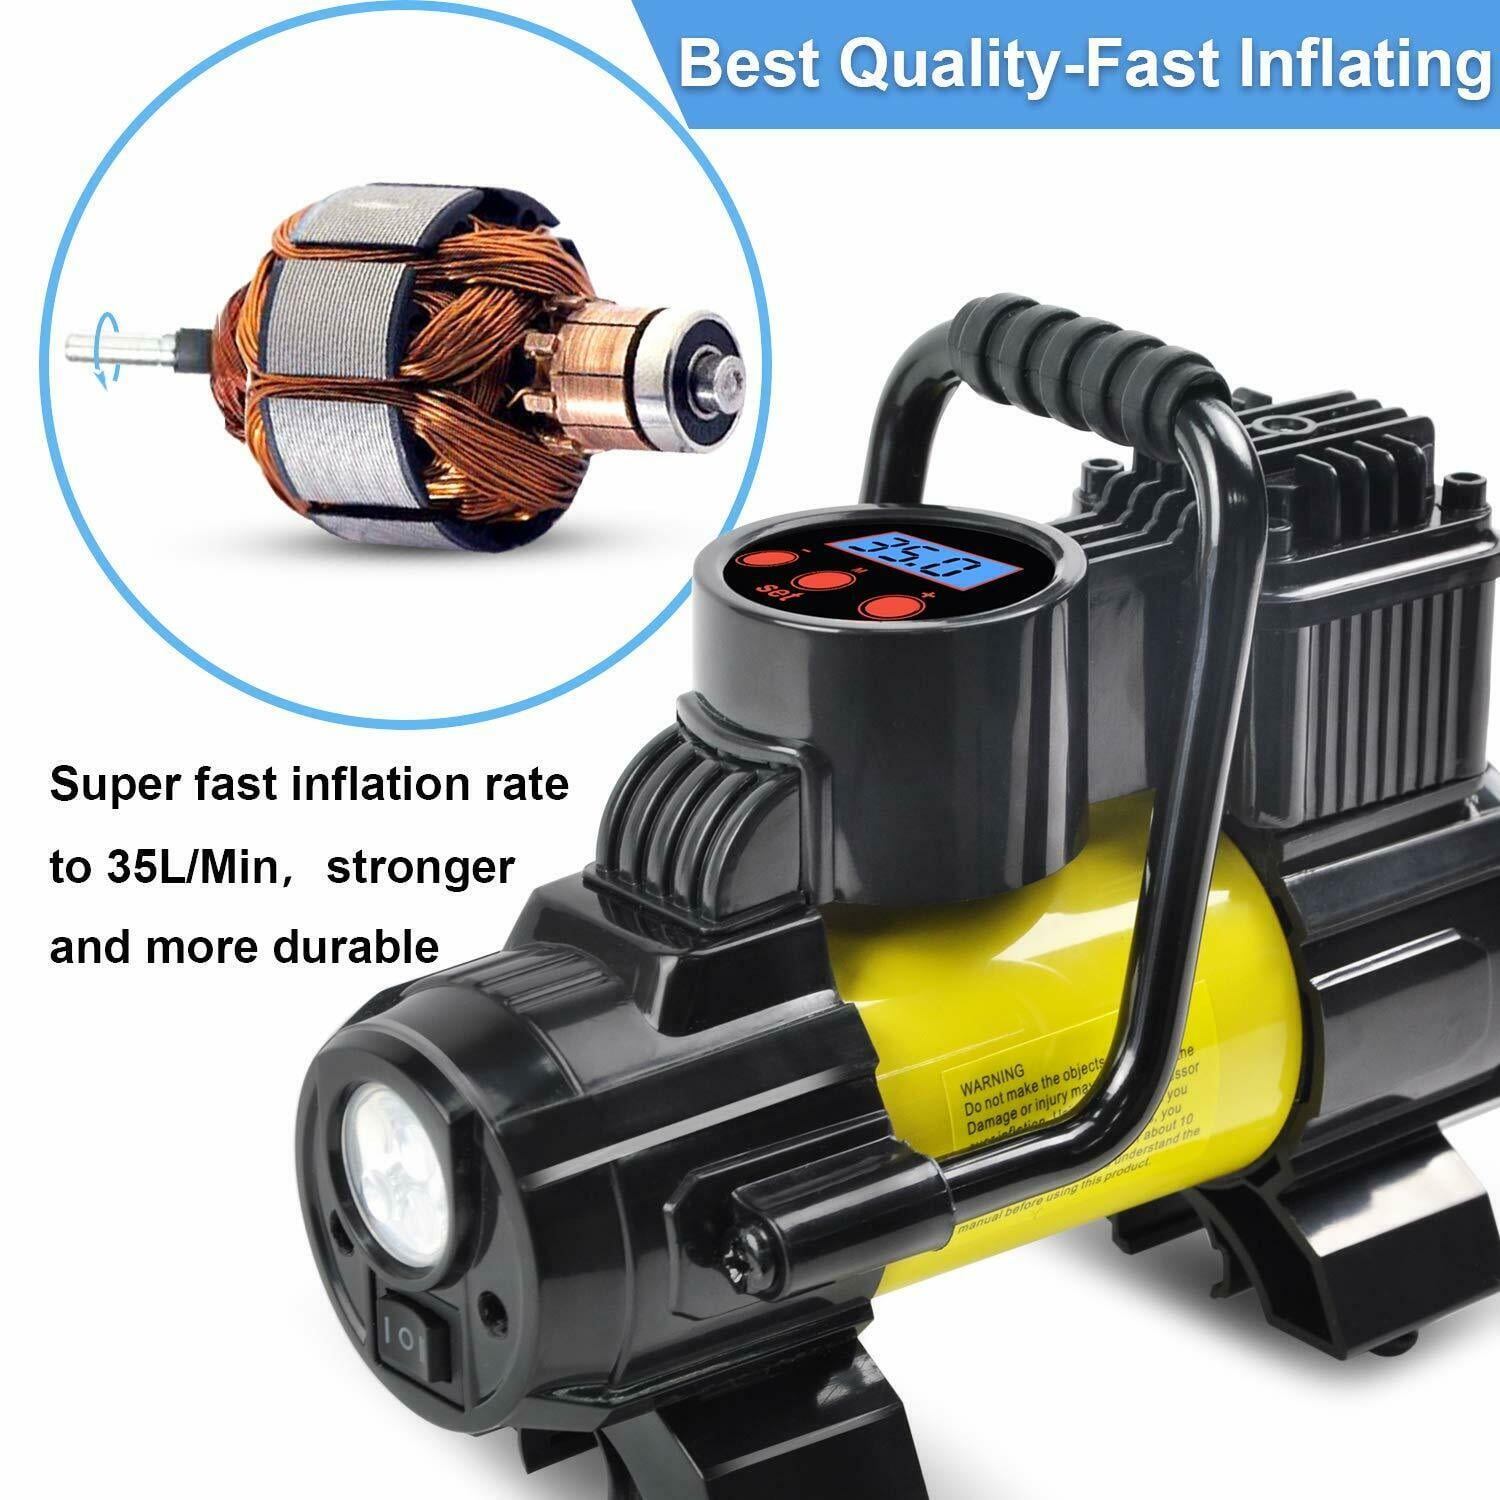 New DC 12V Portable Air Compressor 150 PSI Car Tire Inflator Twin Cylinders 